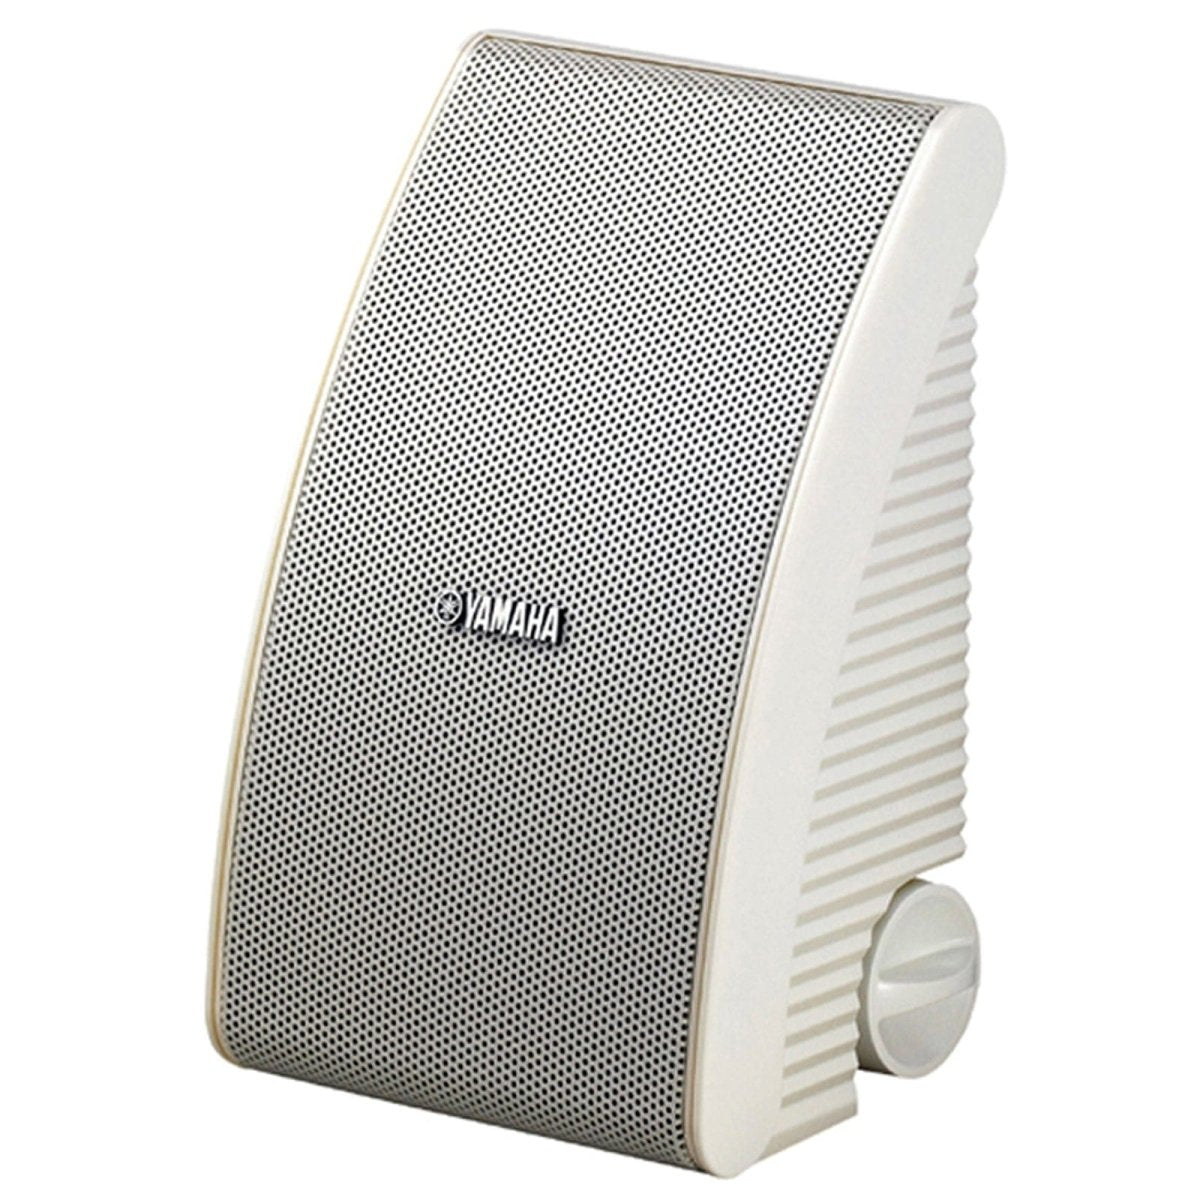 Yamaha NSAW392 120W All Weather Speakers (Pair) - White | Atlantic Electrics